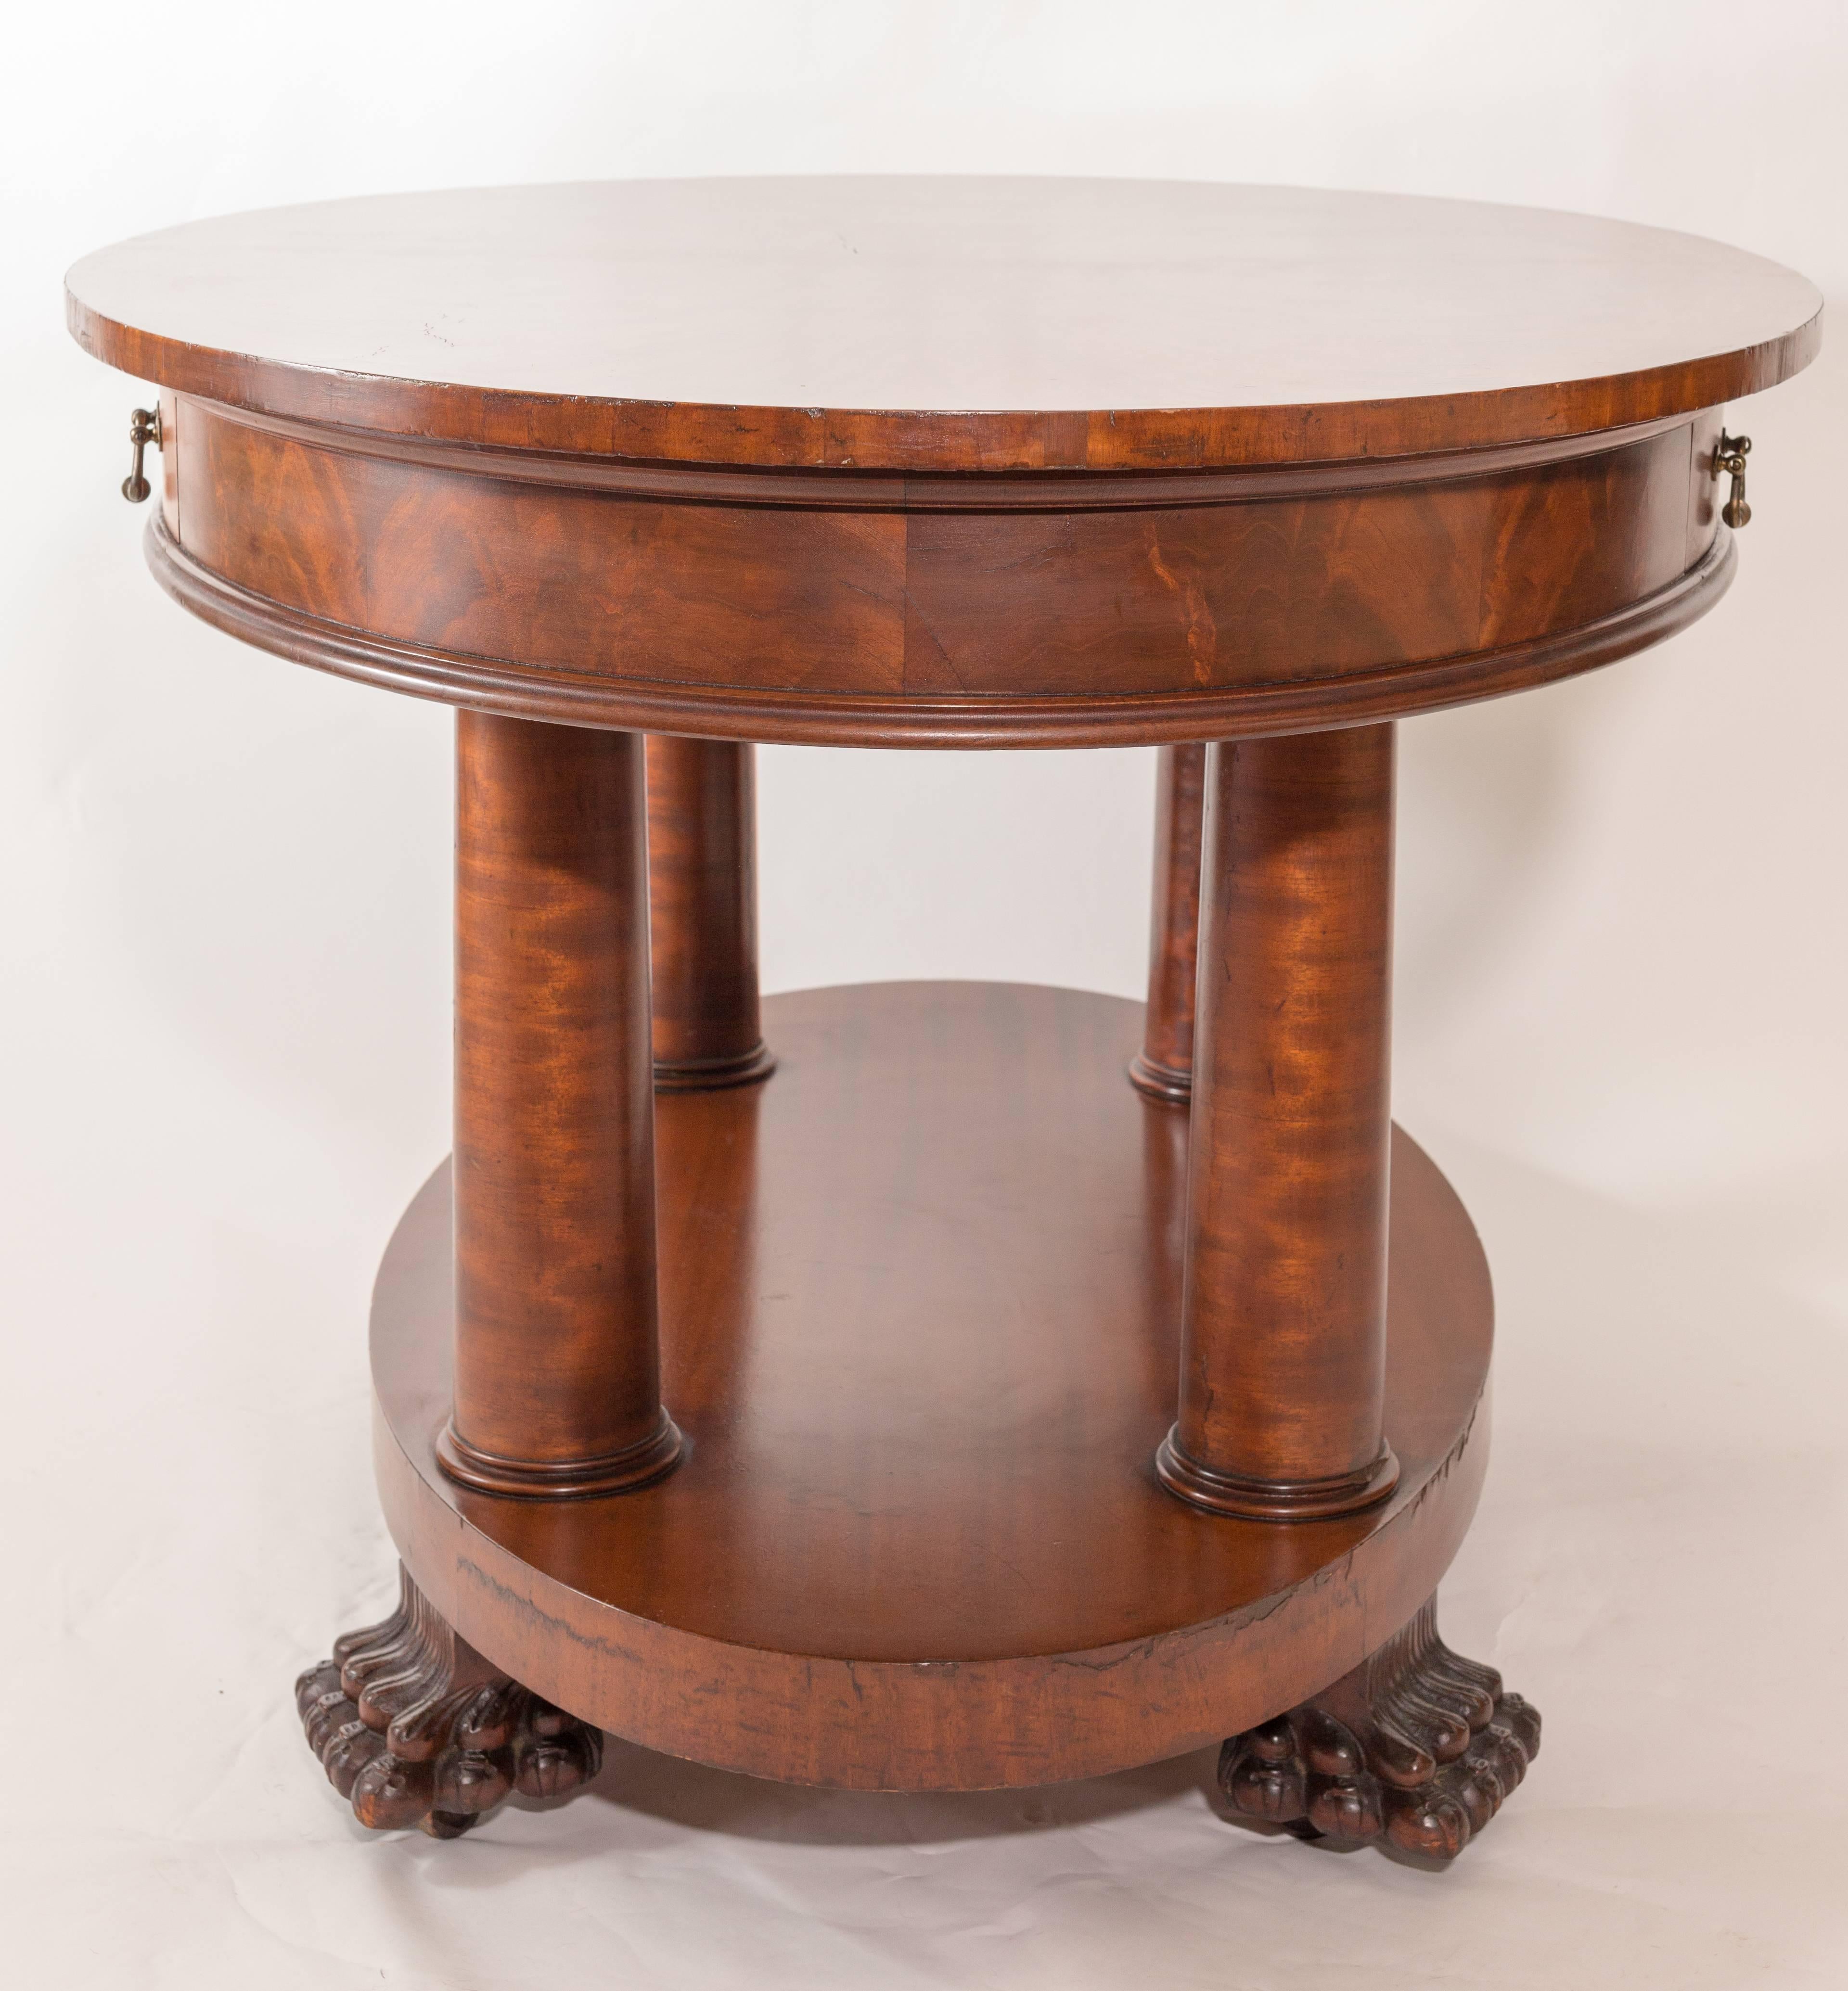 Beautiful Mahogany Empire table with claw feet and its original casters. Pillar legs. Brass hardware on drawers with dovetail detail inside.